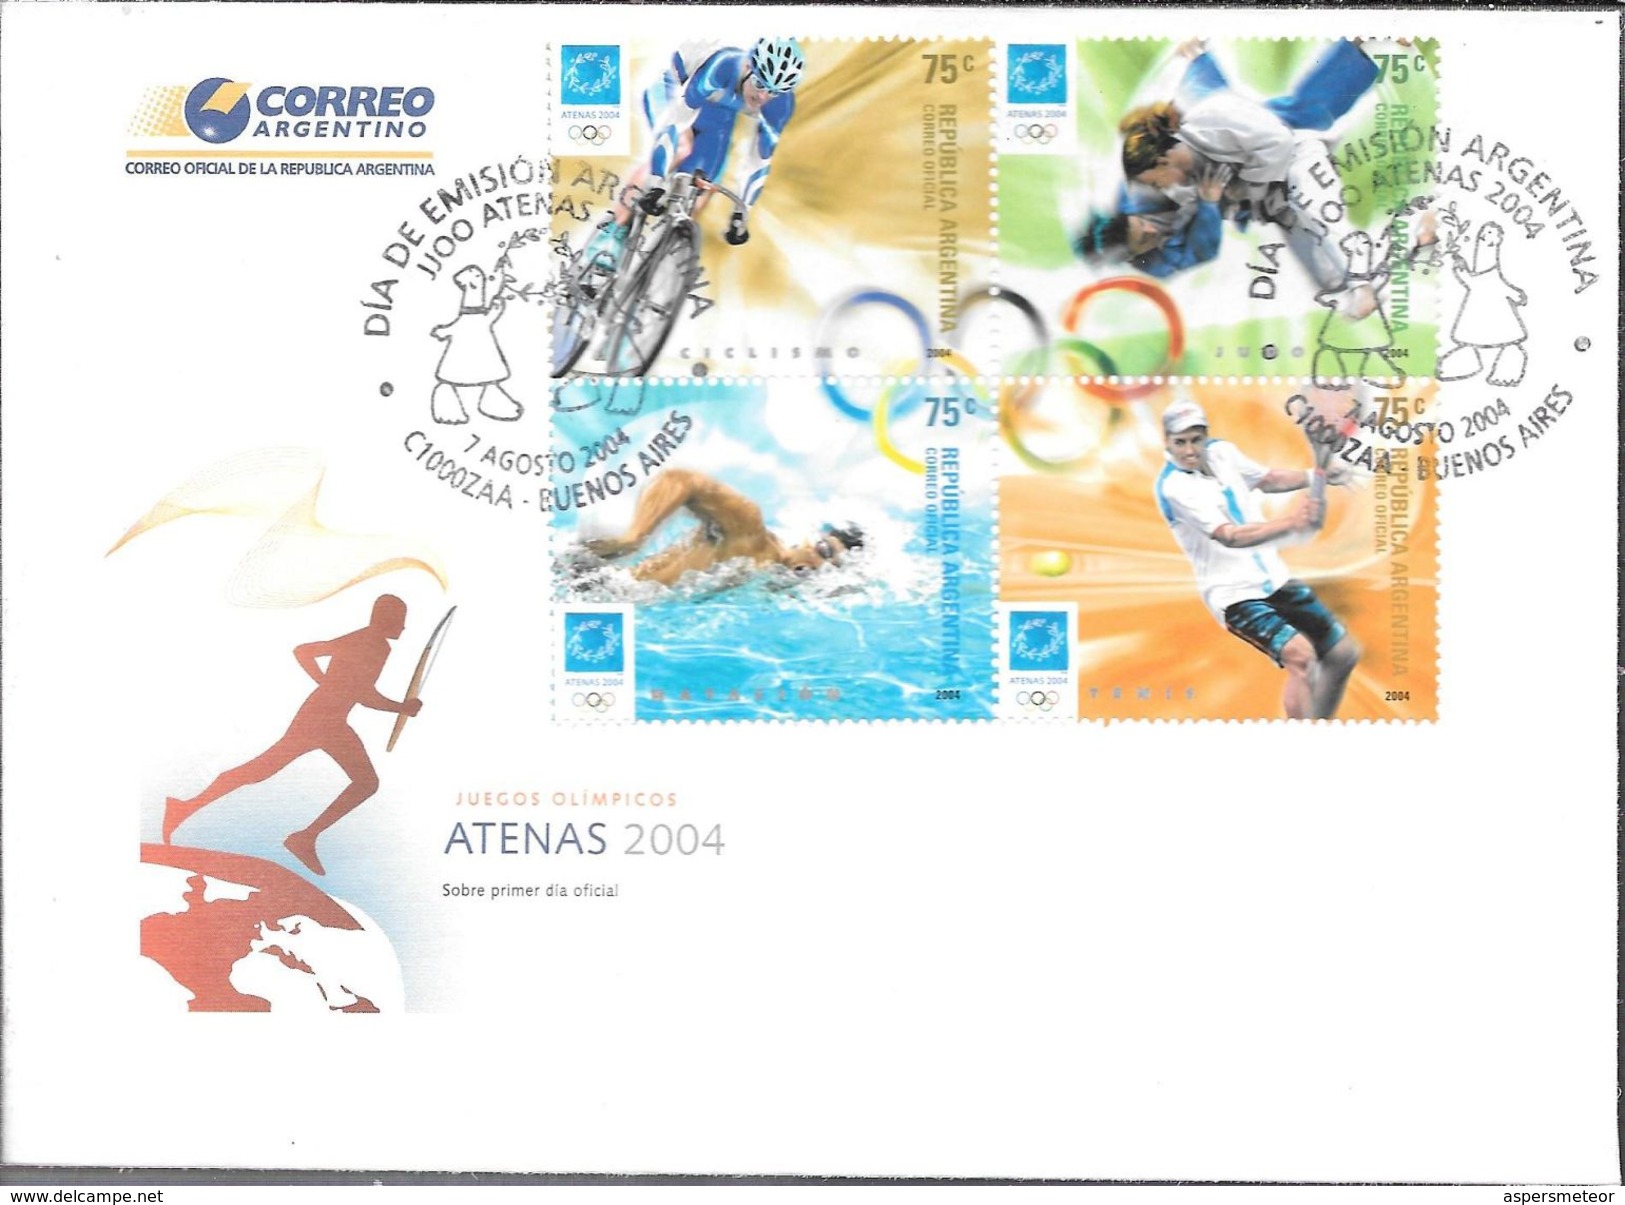 ATENAS ATHENS 2004 JUEGOS OLIMPICOS ARGENTINA L'ARGENTINE SERIE COMPLETA FDC SOBRE OLYMPIC GAMES - Winter 2012: Innsbruck (Olympische Jugendspiele)